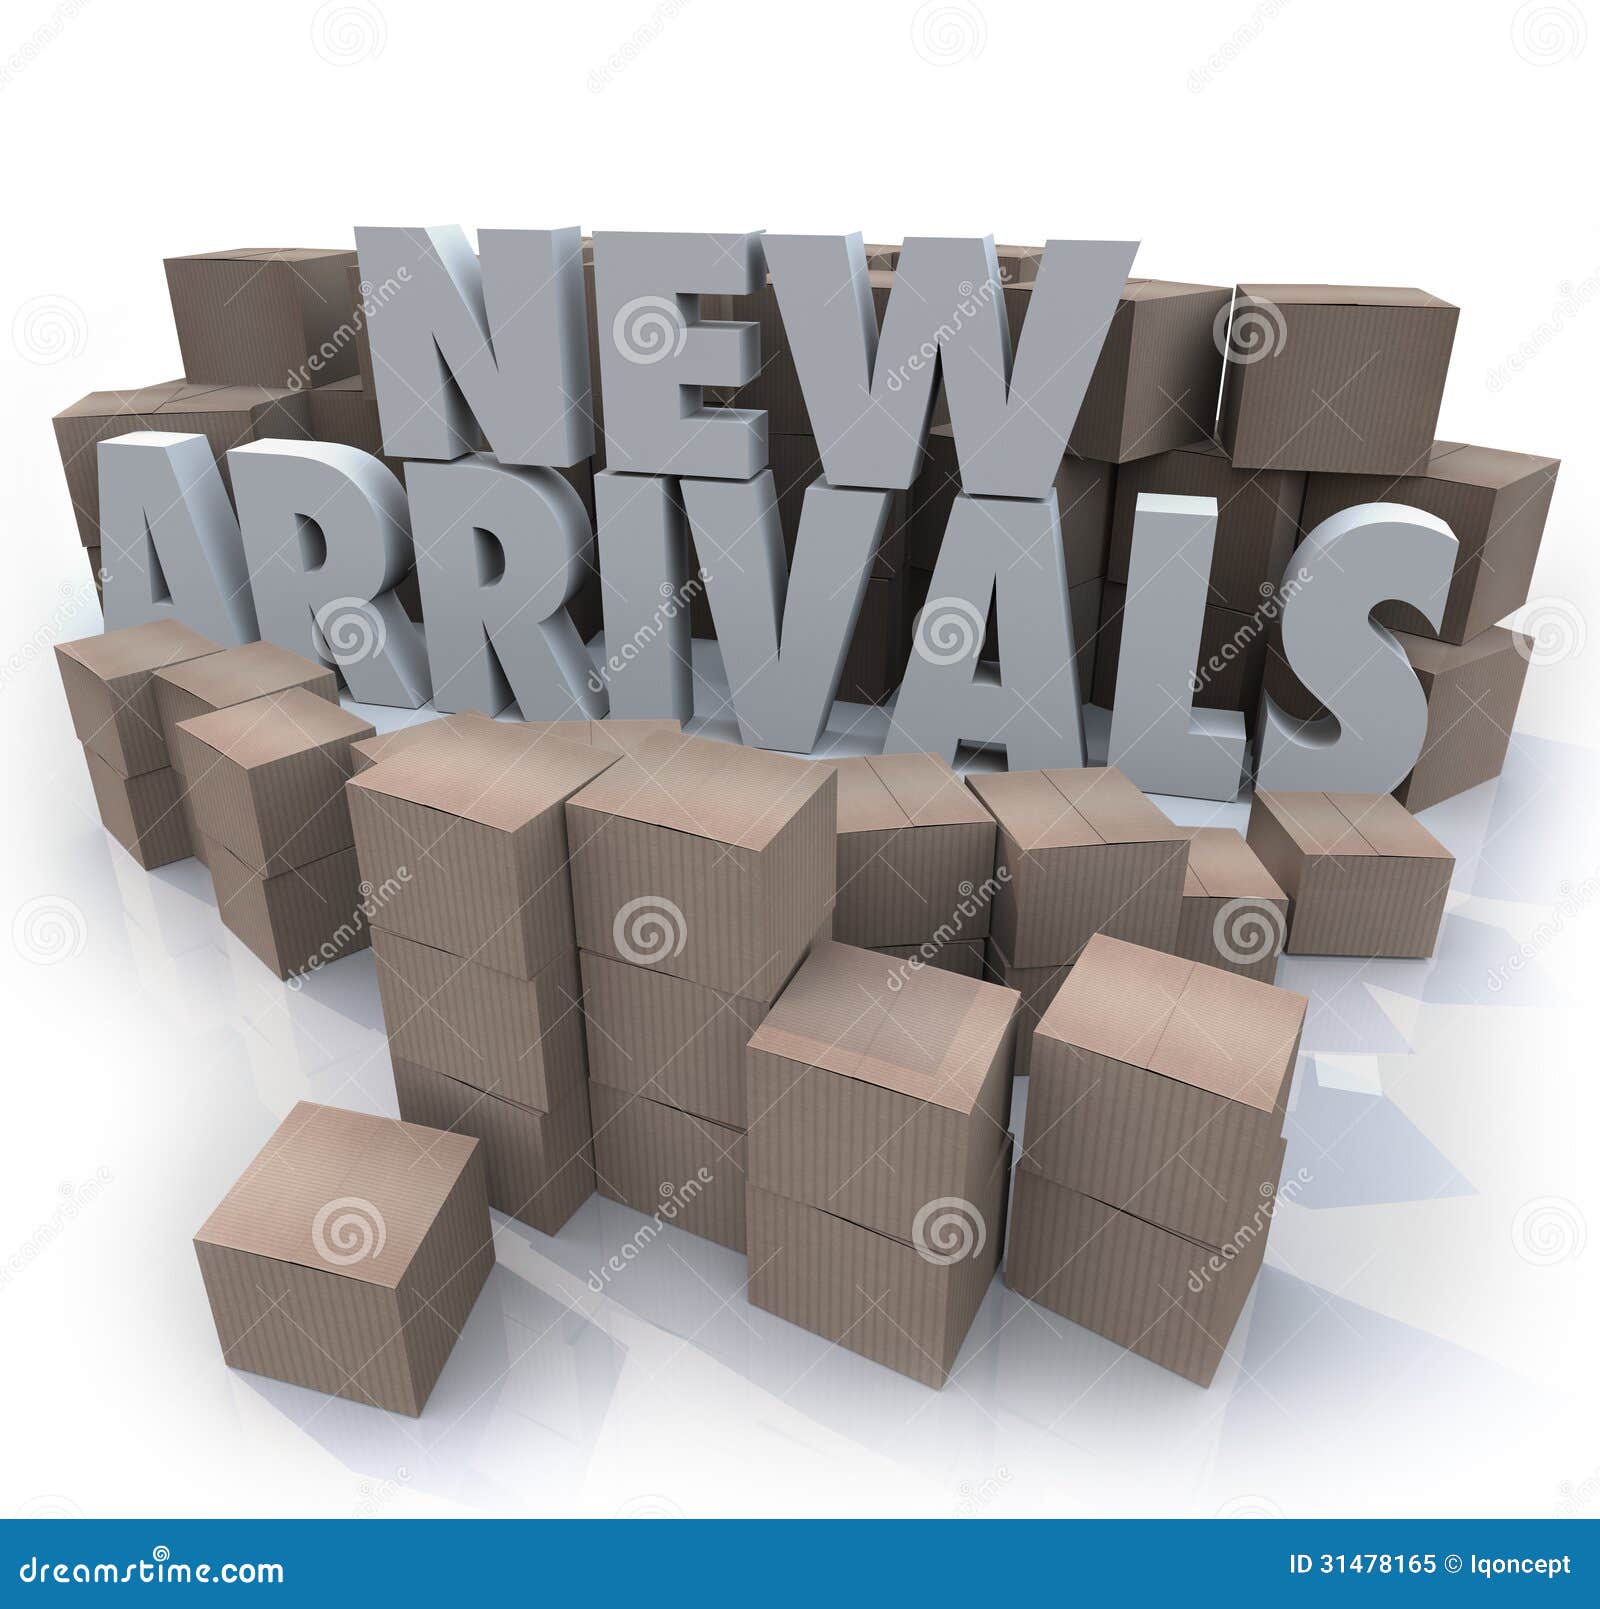 new arrivals cardboard boxes items merchandise products